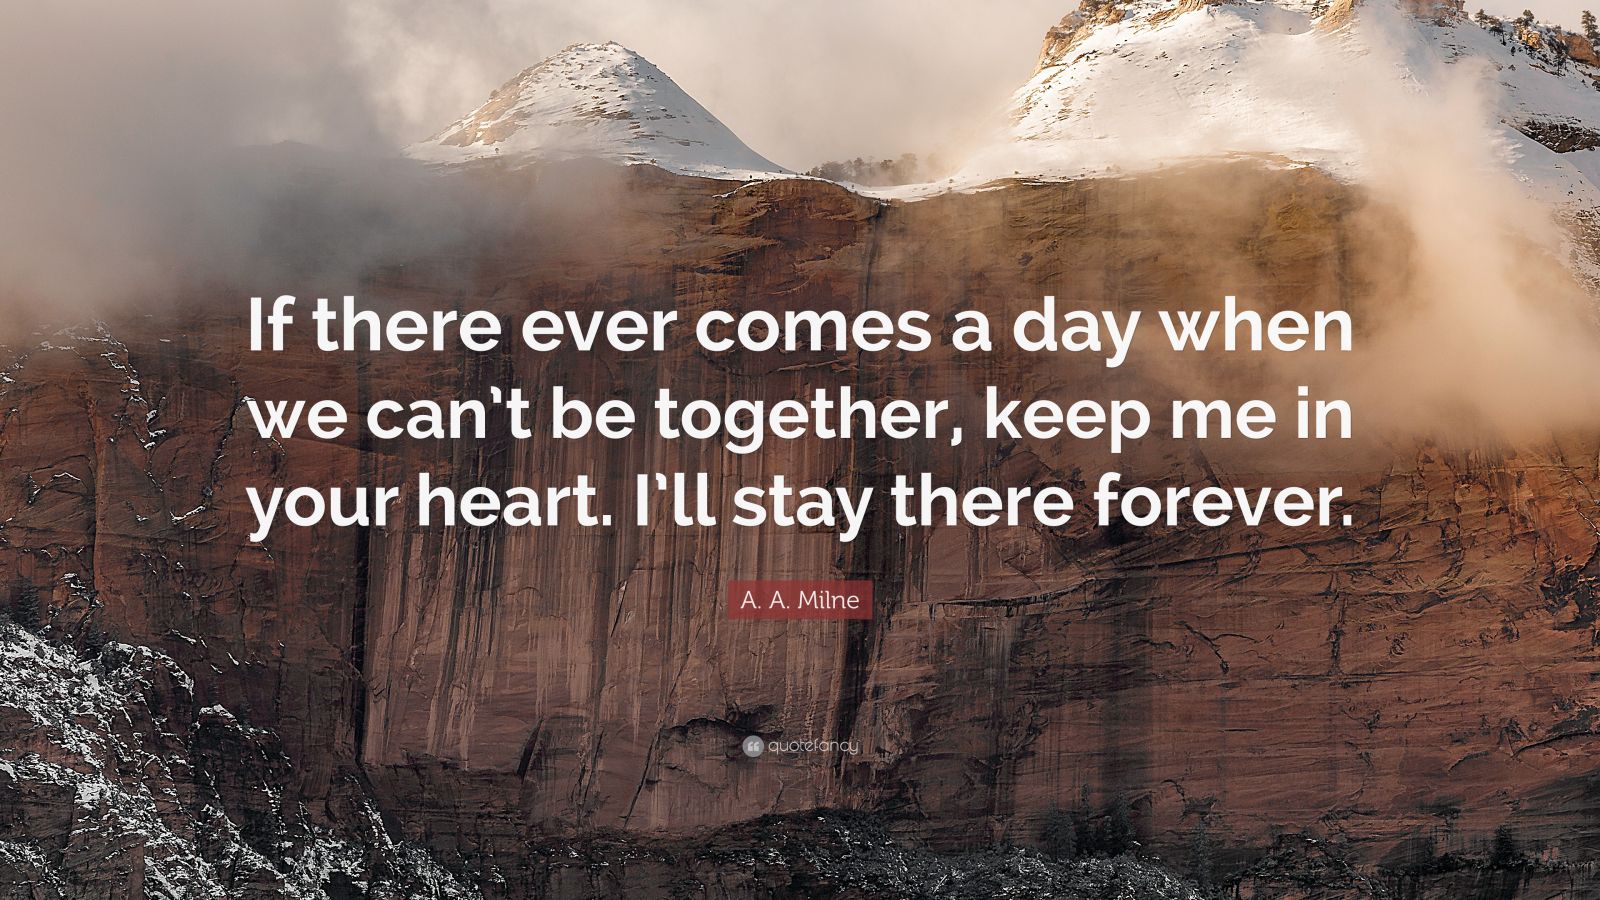 A. A. Milne Quote: “If there ever comes a day when we can’t be together ...